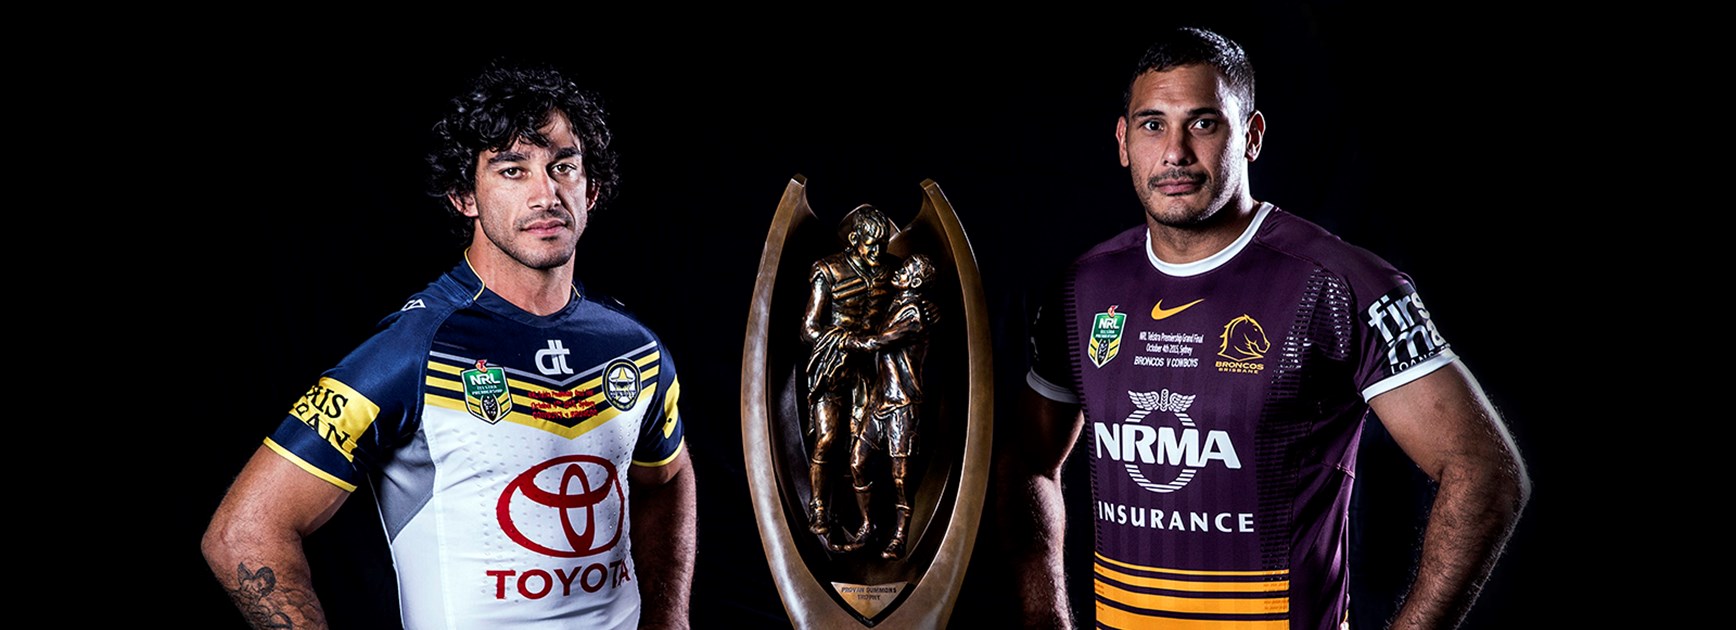 Will it be Johnathan Thurston or Justin Hodges who lifts the Provan-Summons Trophy on Sunday night?